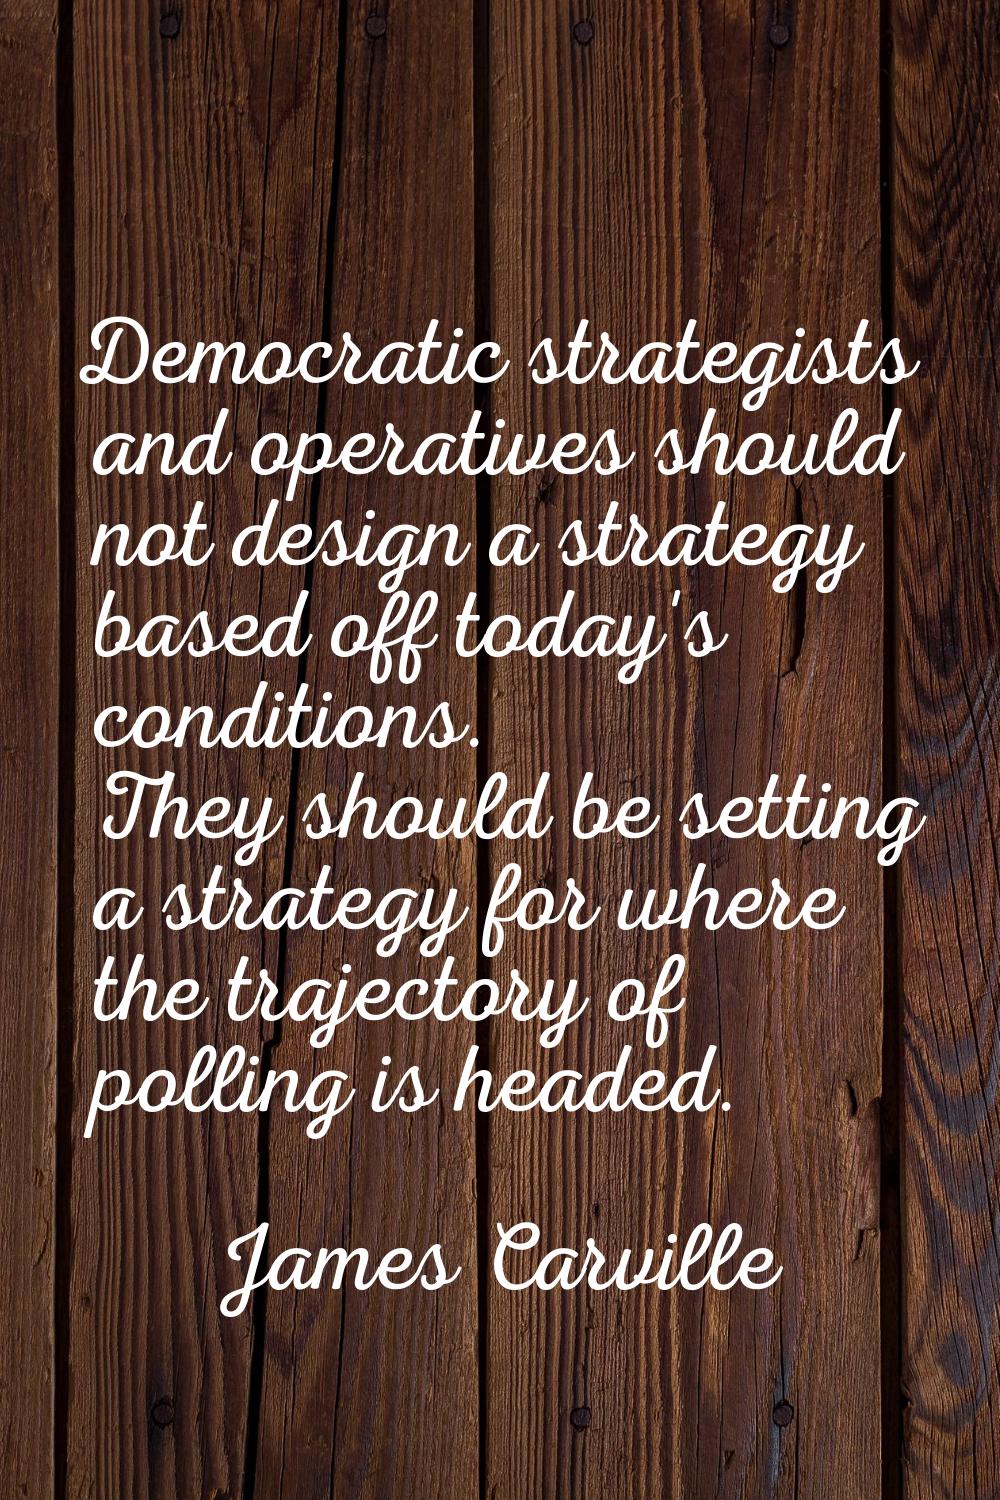 Democratic strategists and operatives should not design a strategy based off today's conditions. Th